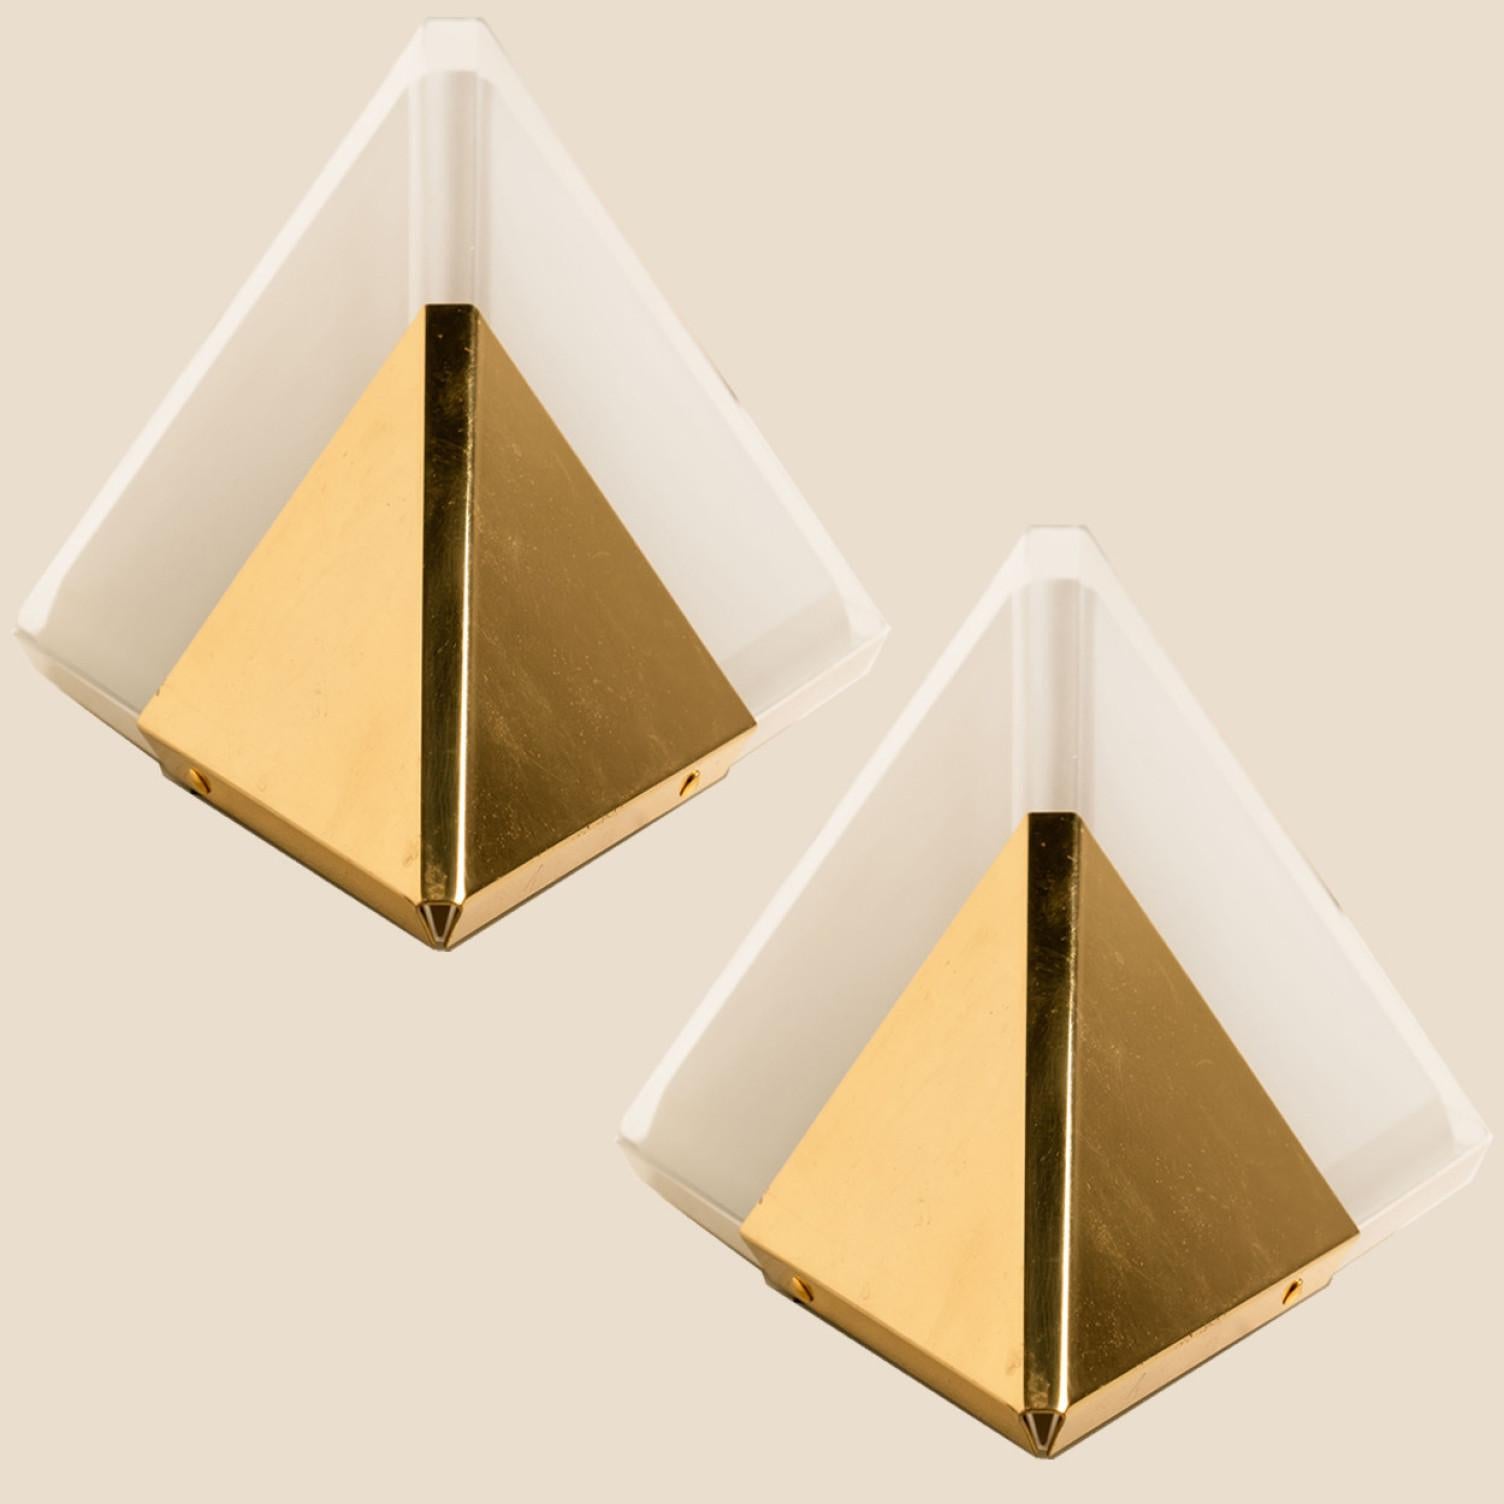 Late 20th Century Pyramid Milk Glass and Brass Wall Lights by Glashütte Limburg, 1970s For Sale